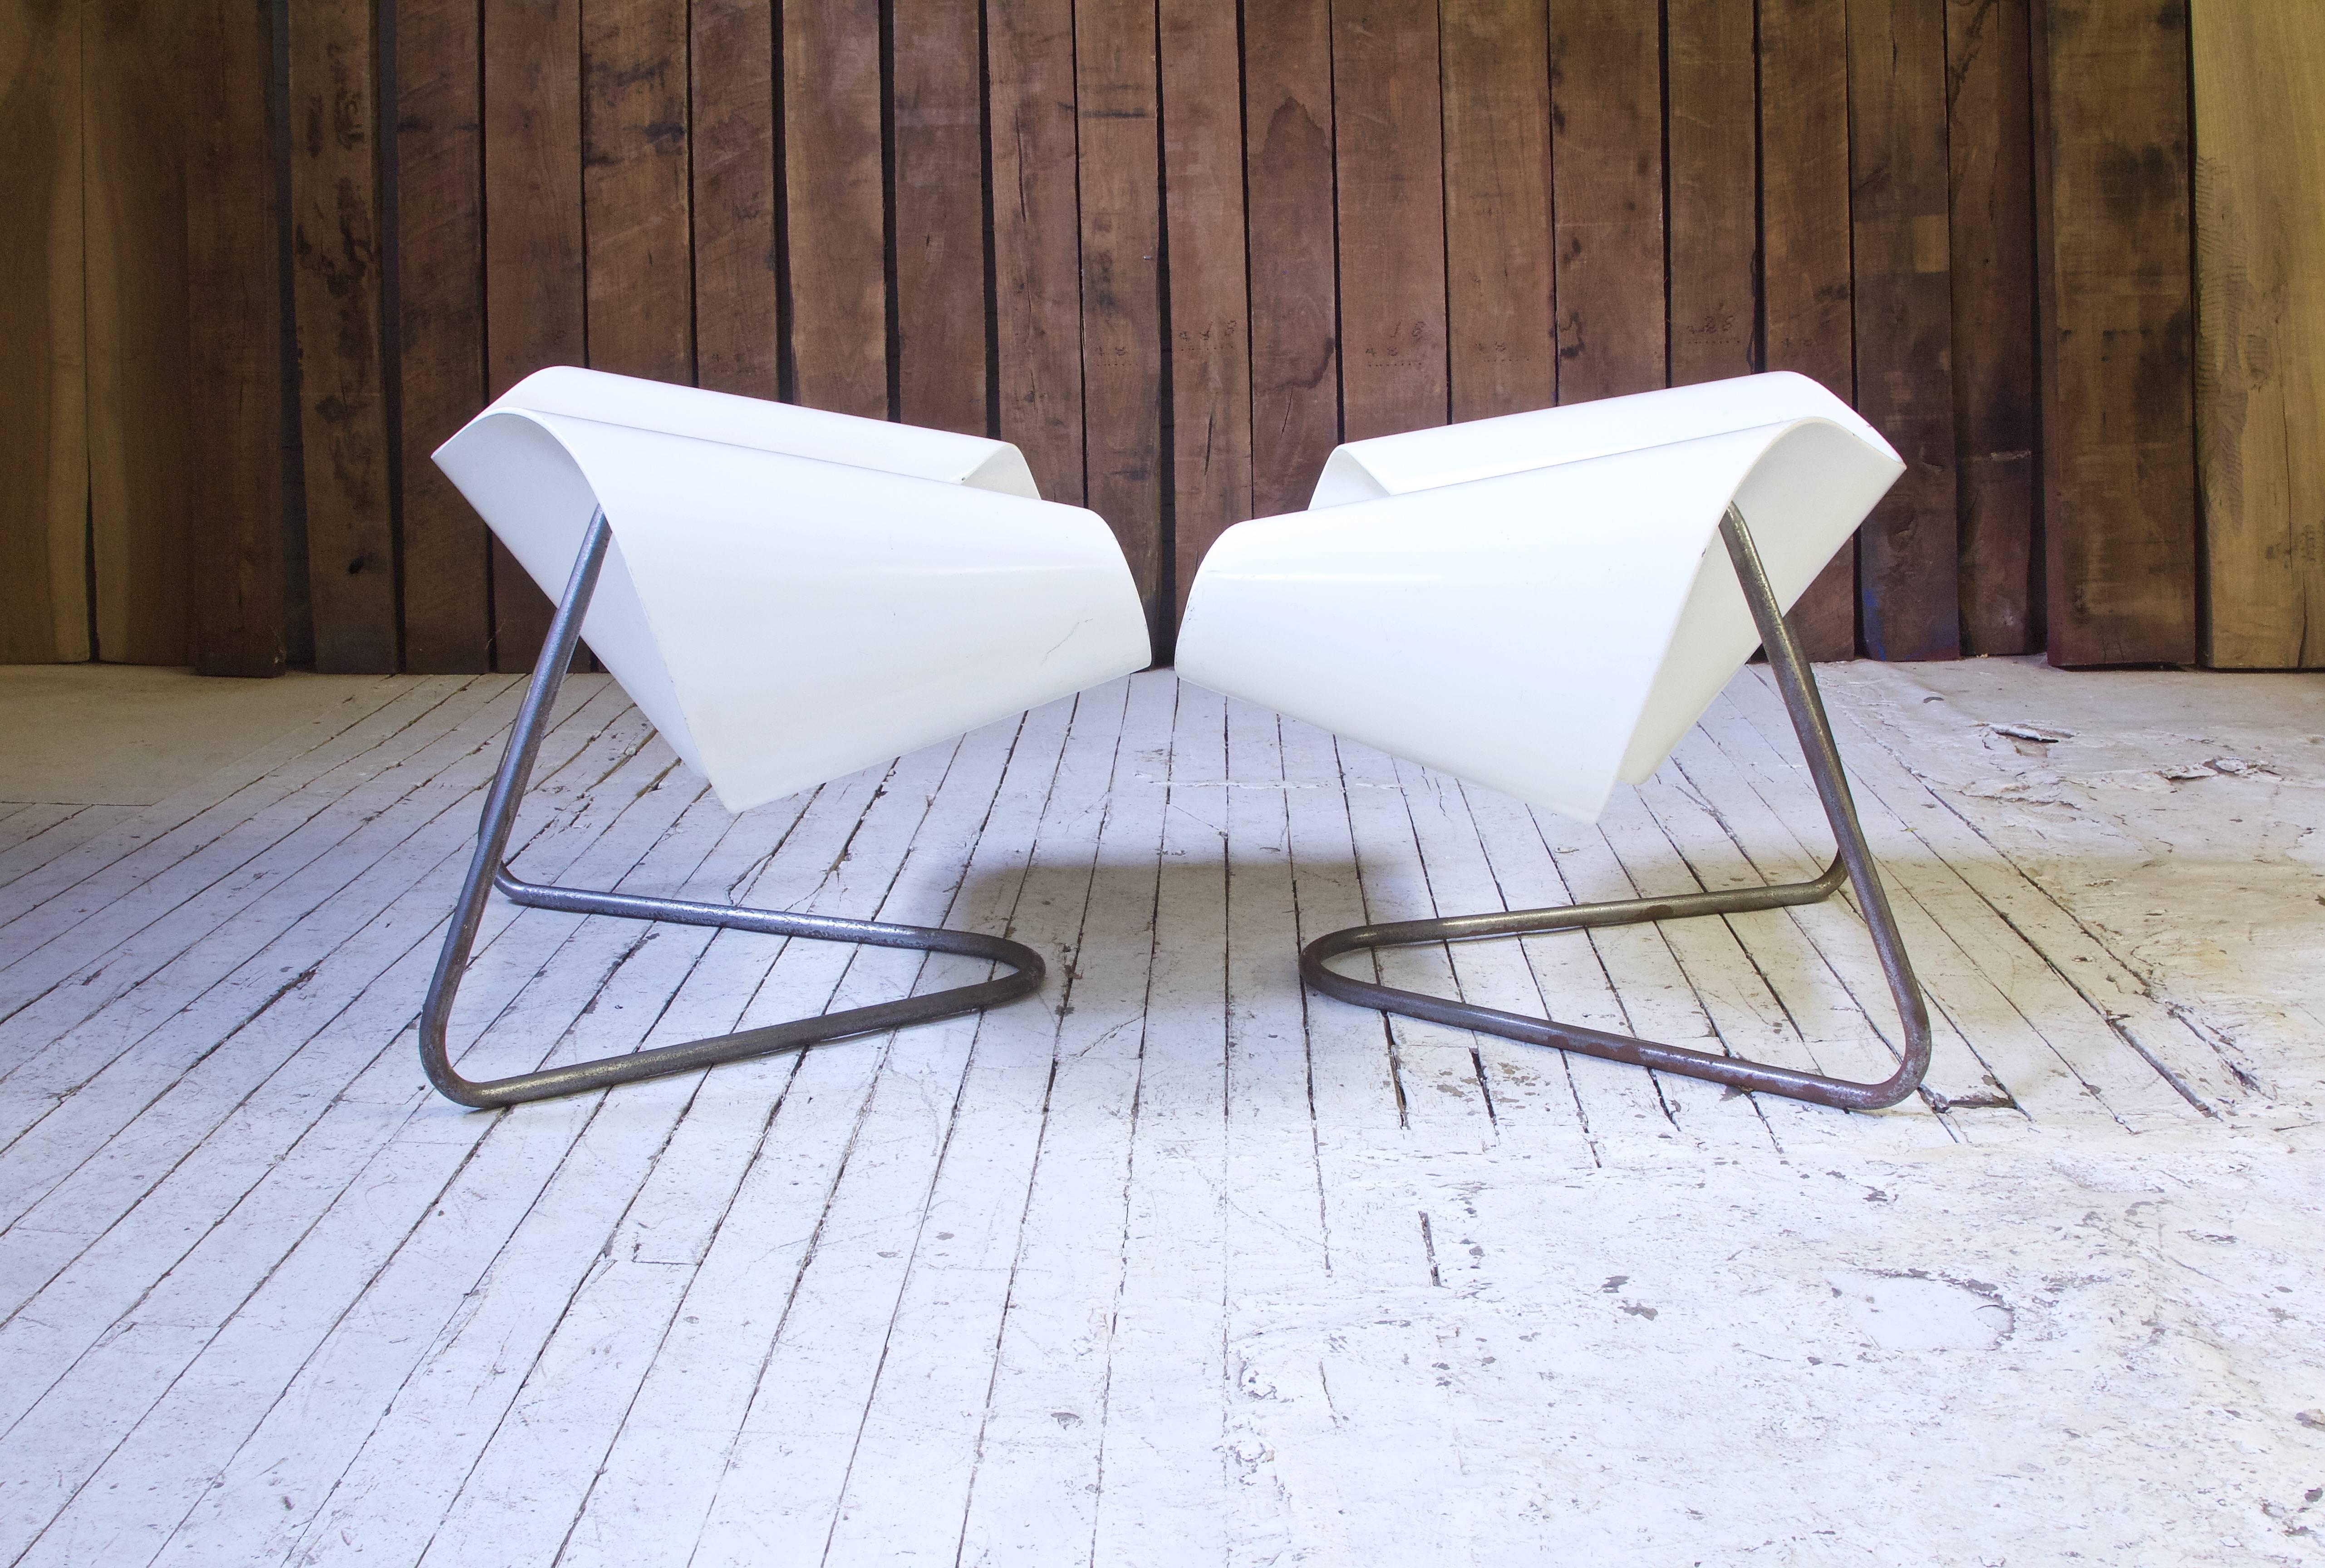 Sculptural, rare CL-9 fiberglass and polished steel lounge chairs by Franca Stagi and Cesare Leonardi for Bernini, 1961. Incredible lines, extremely comfortable; awesome examples of Italian experimental design of the mid-20th century.

(One chair